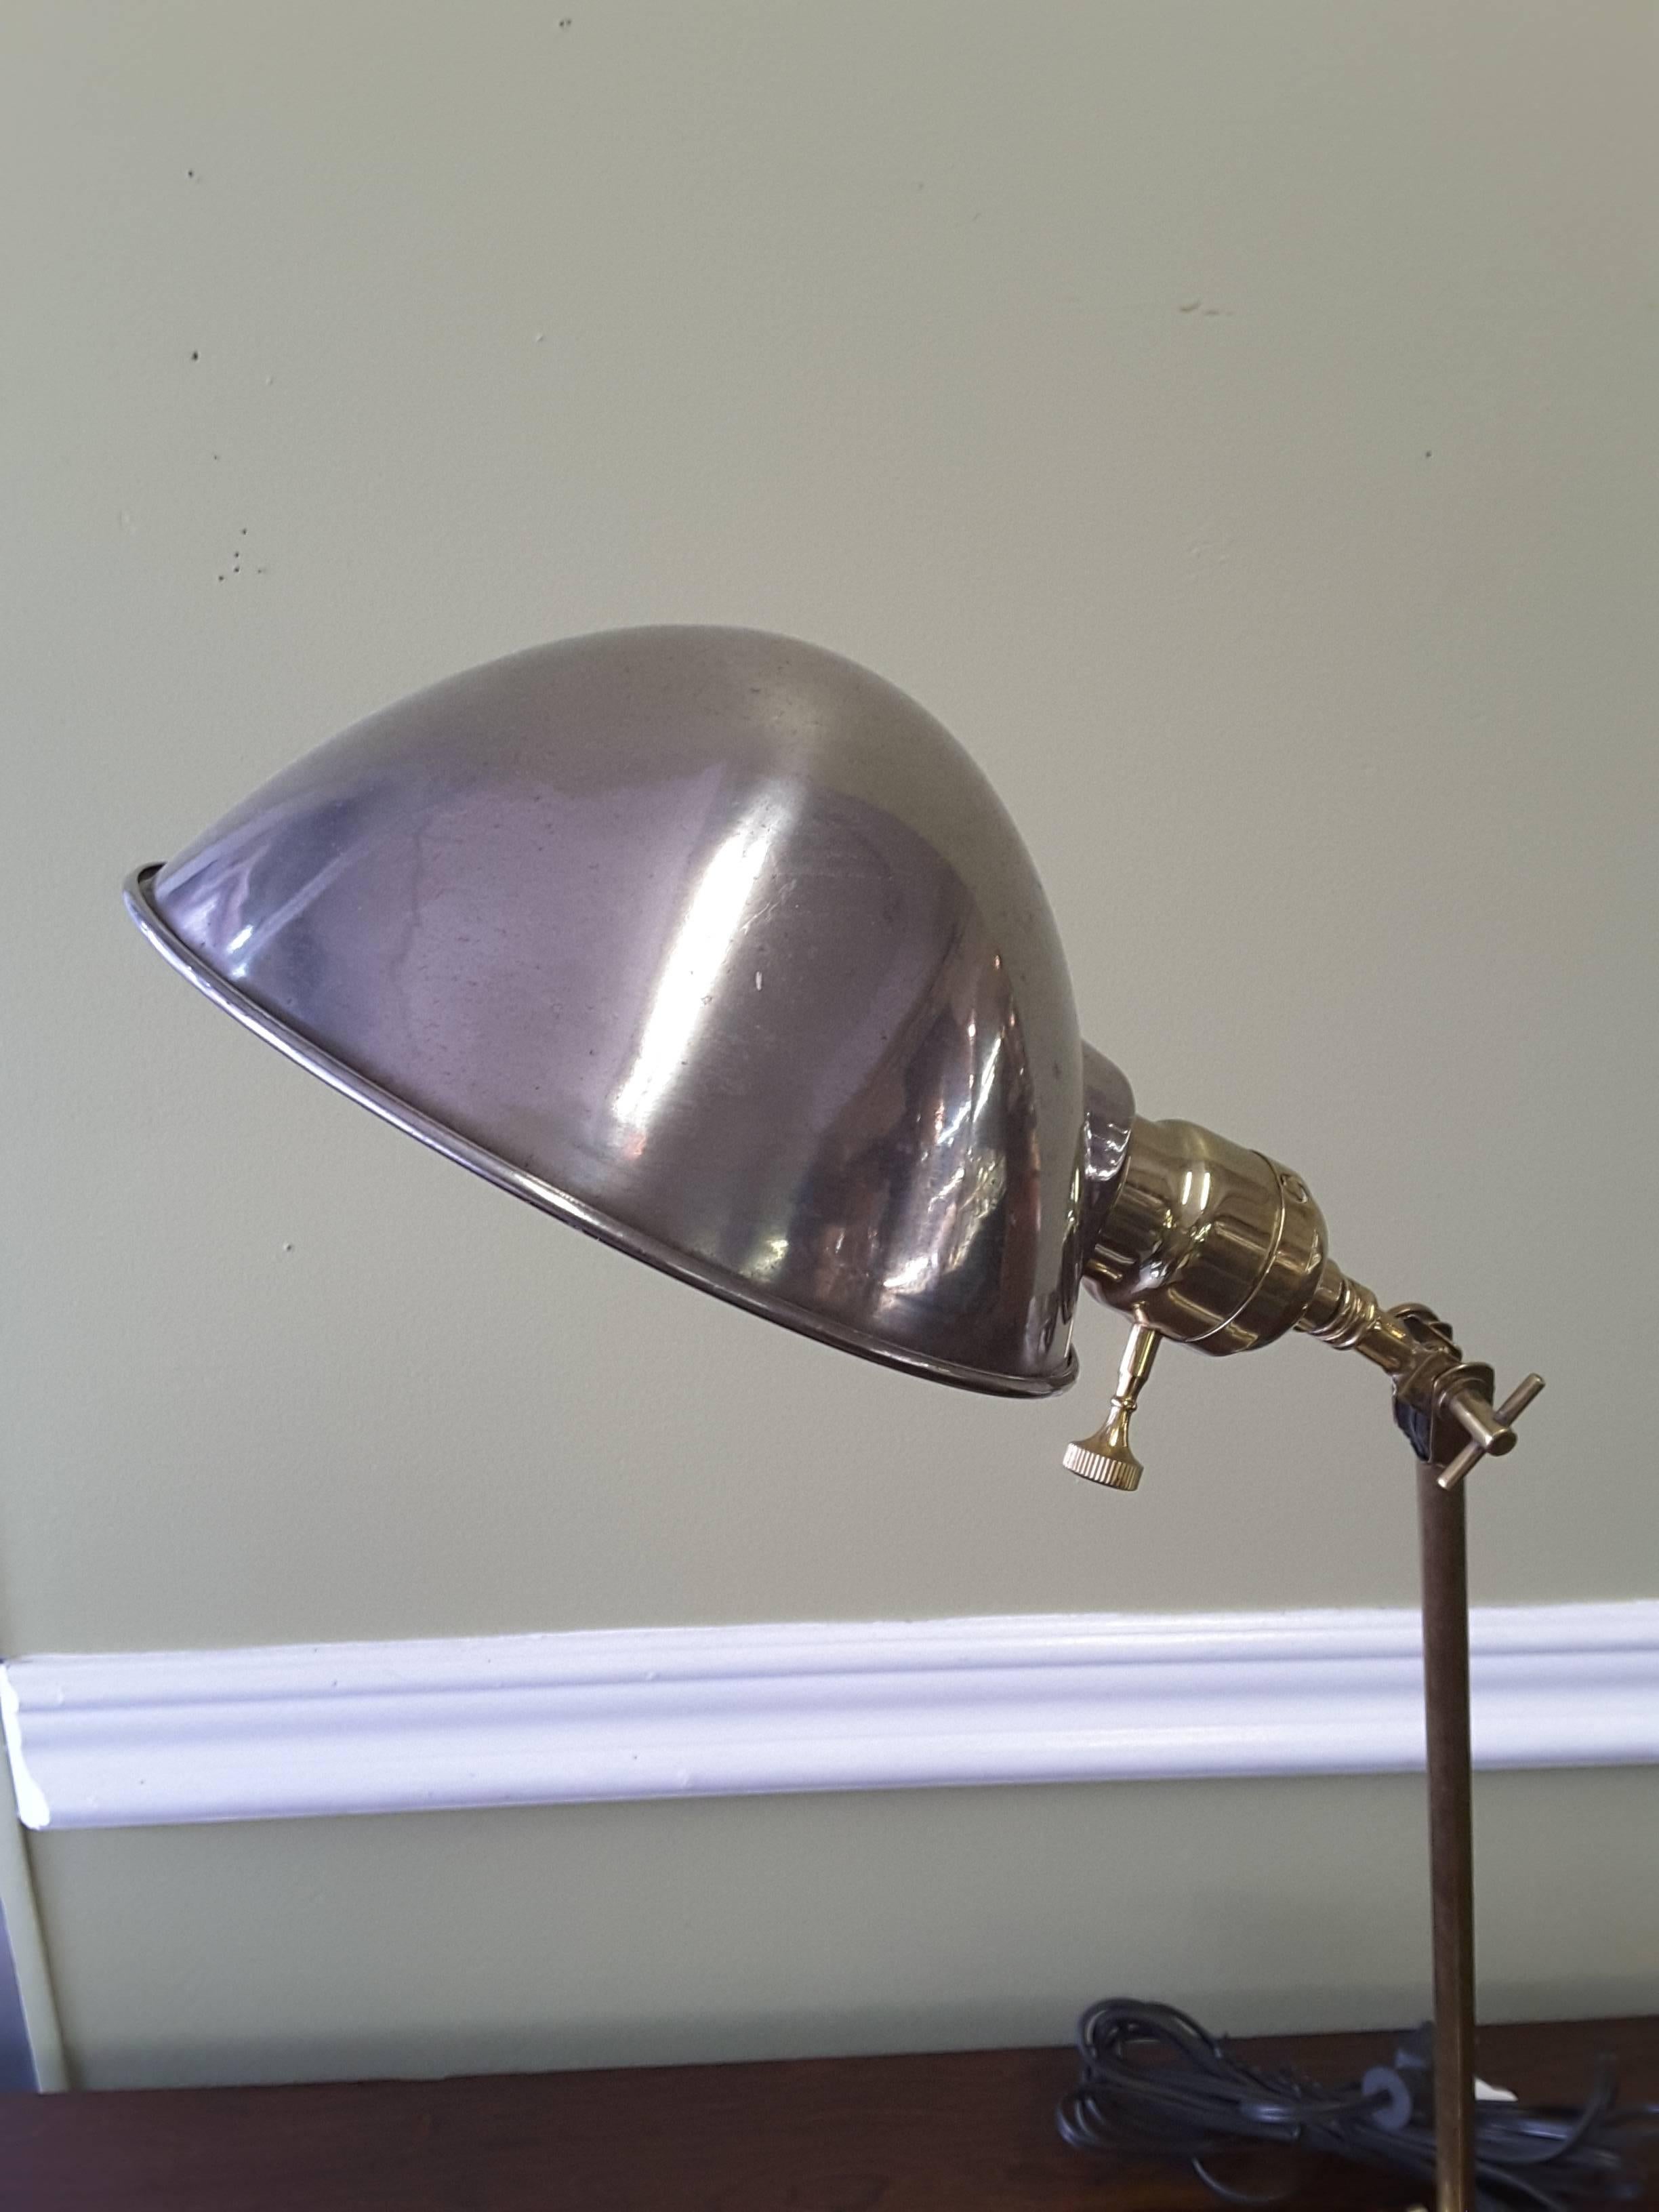 Faries Industrial brass adjustable desk lamp with polished steel shade, circa 1920. An adjustable desk lamp popularized by Faries. The lamp has newer replaced wire and plug a high polished steel lamp shade and is adjustable to multiple positions.